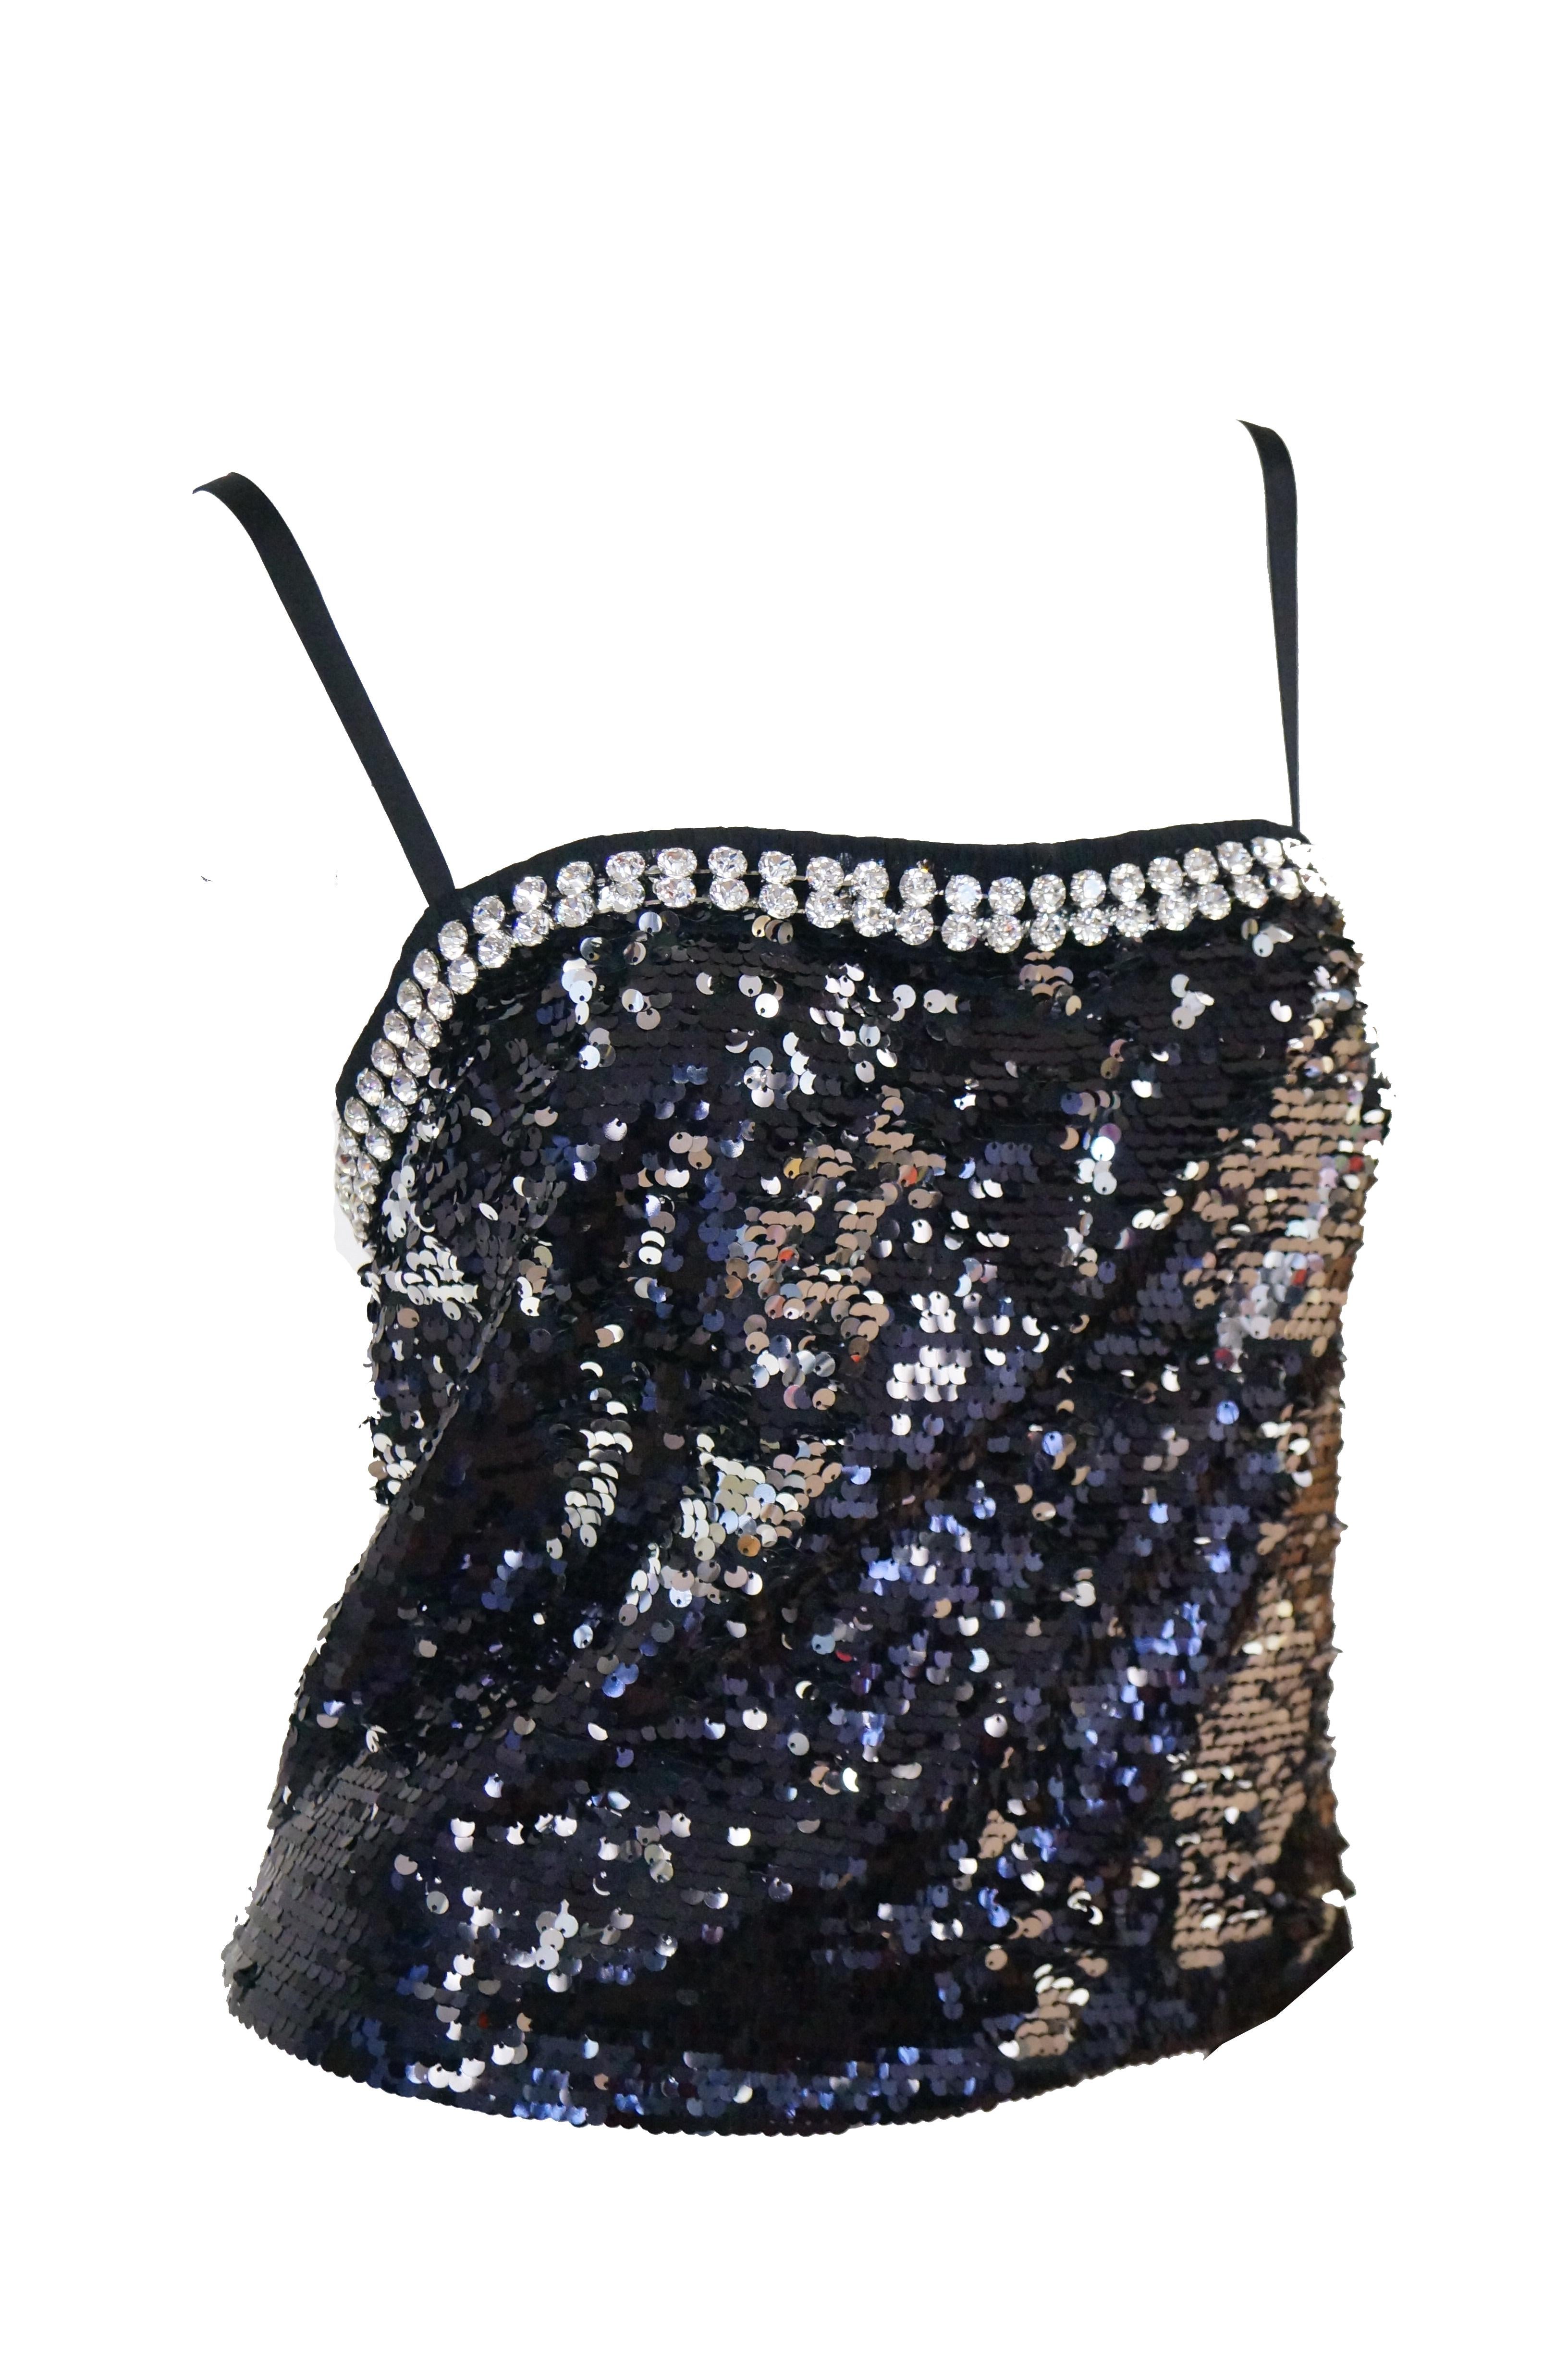 NWT 2010 Dolce & Gabbana Silver/Black Swarovski Crystal Sequin Top In New Condition For Sale In Houston, TX